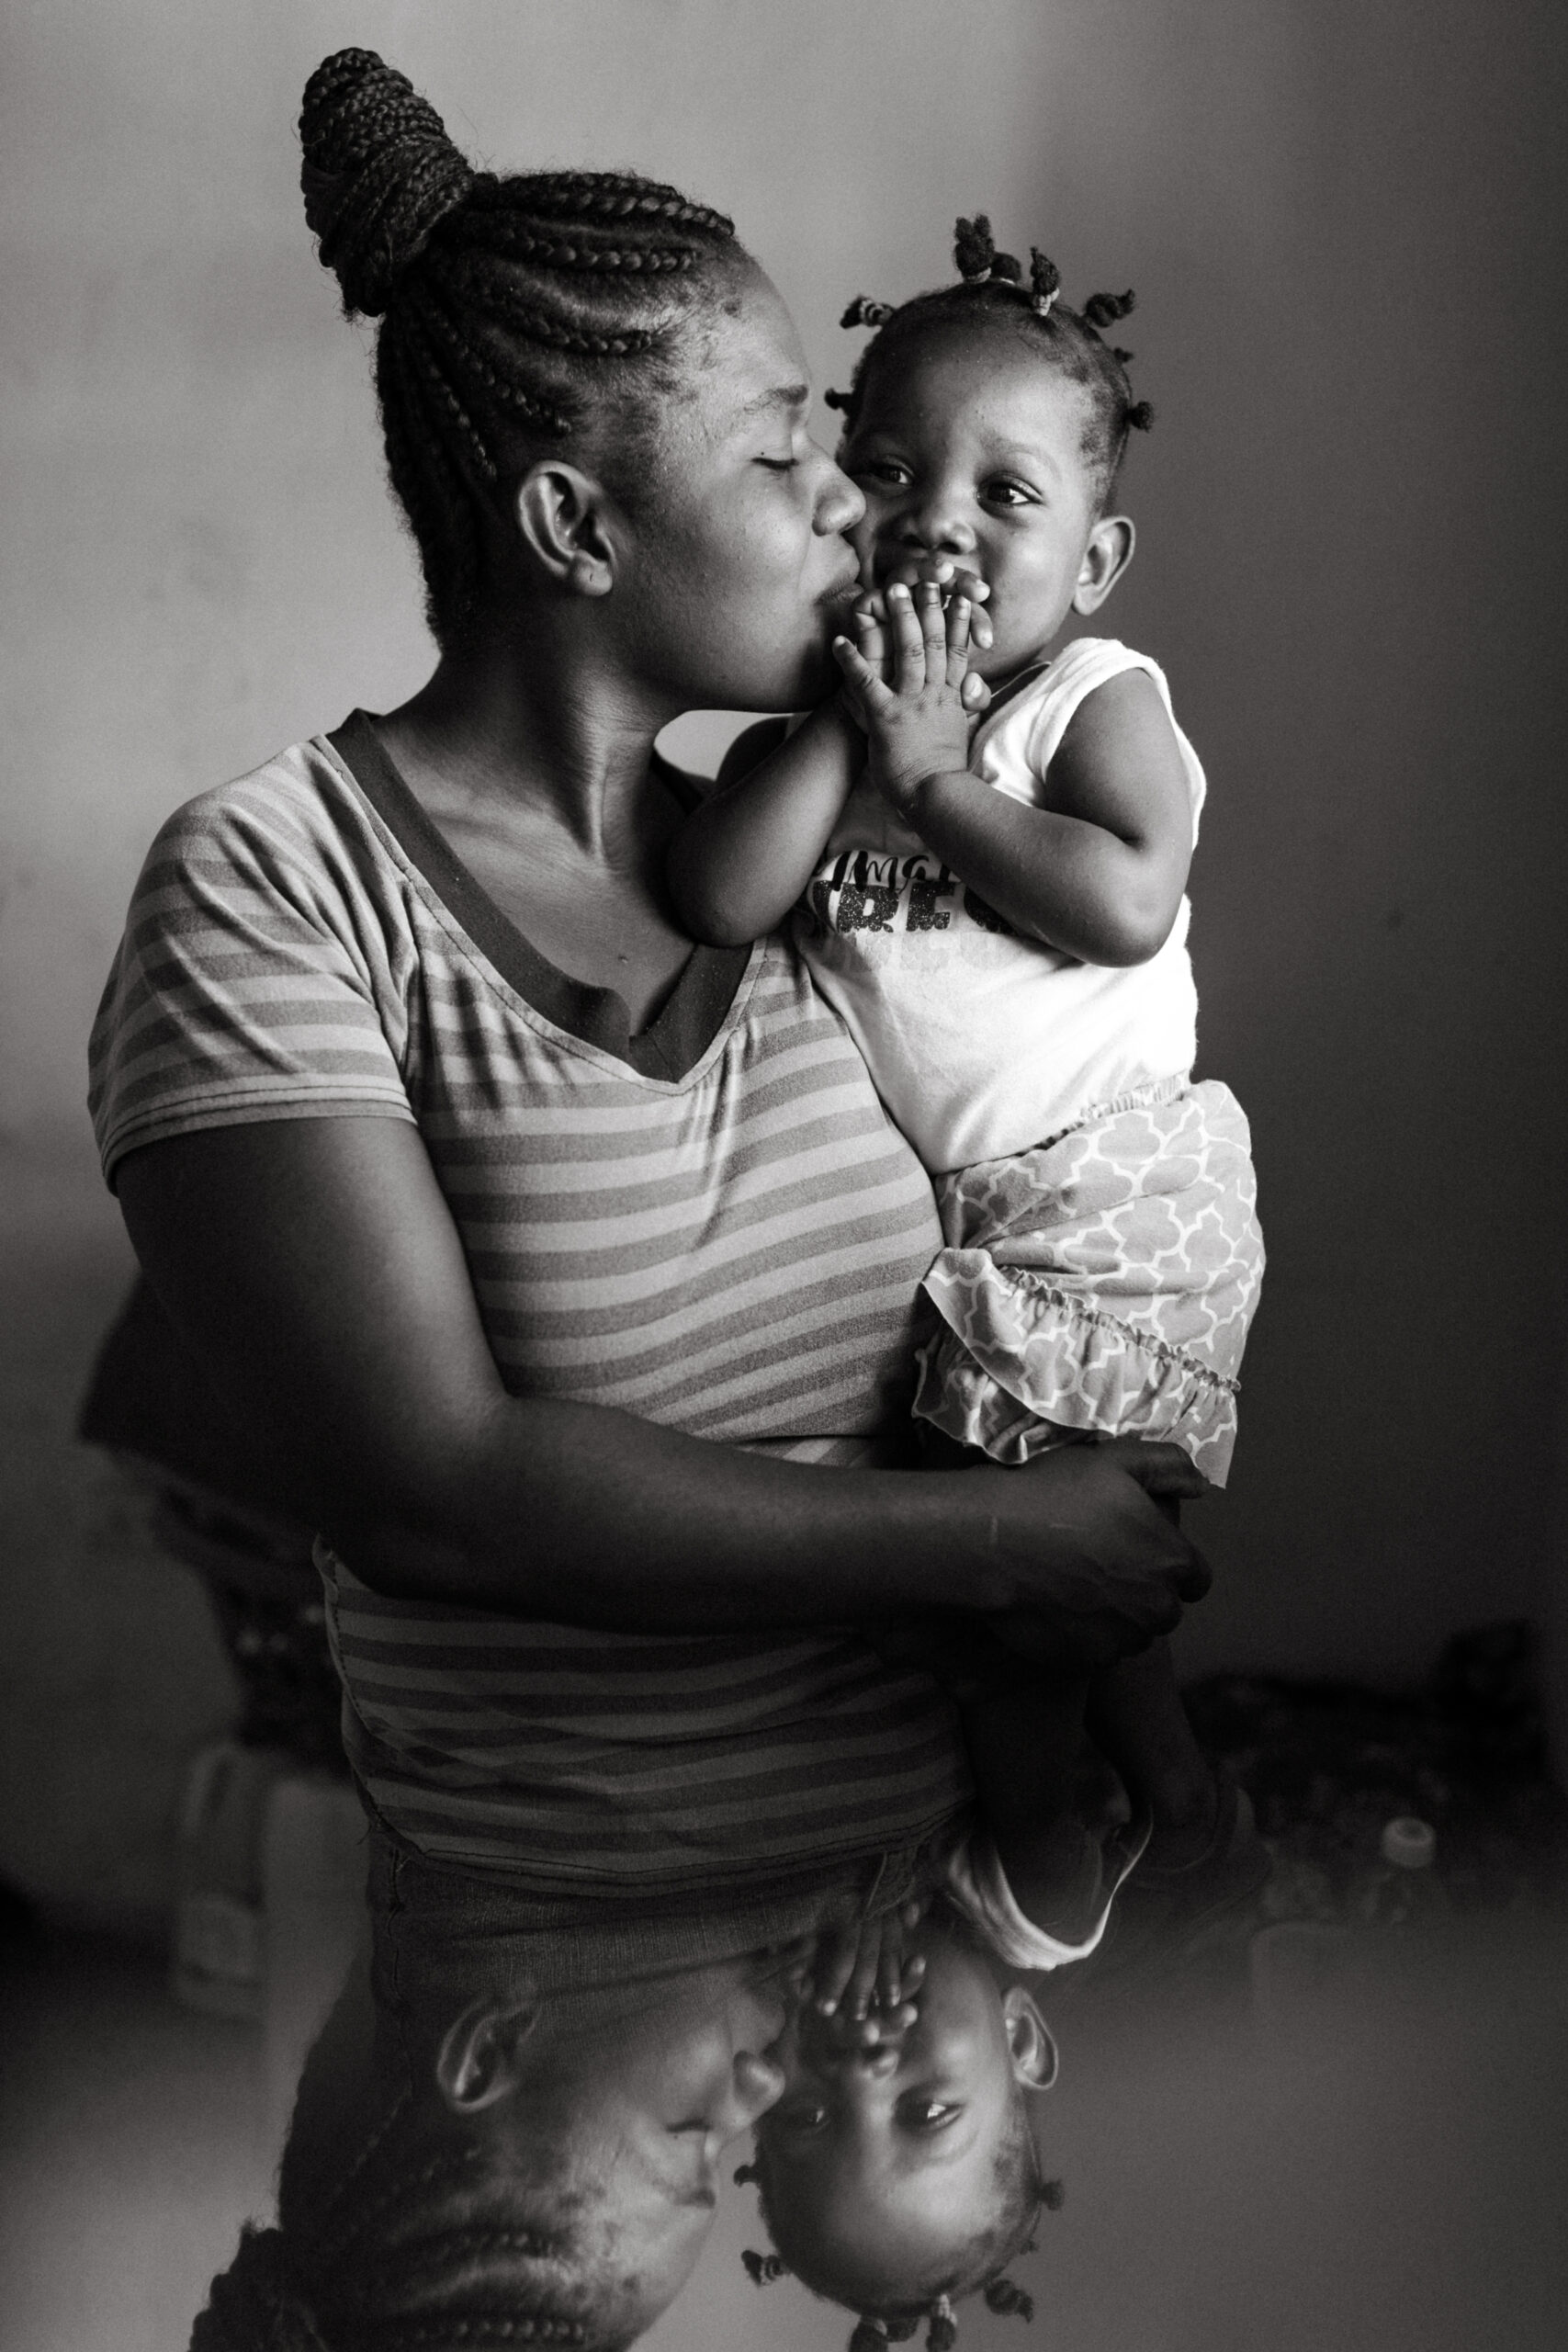 Haitian woman holds her child in Port-au-Prince, Haiti